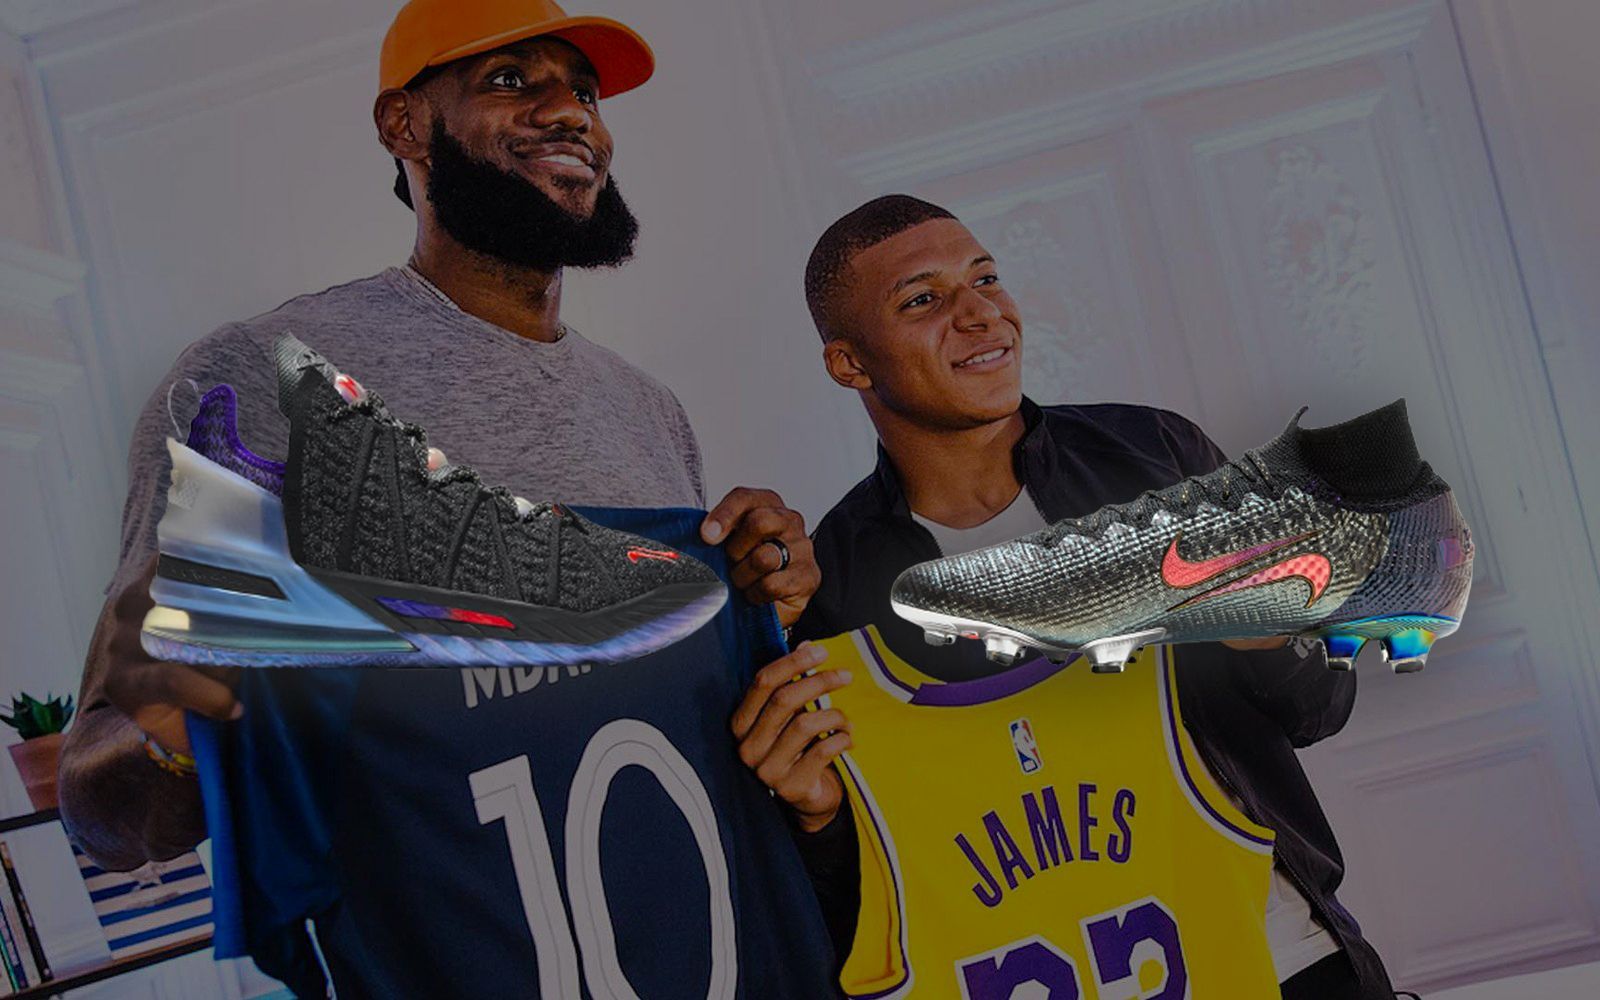 The collaboration between Nike, Lebron James and Kylian Mbappé